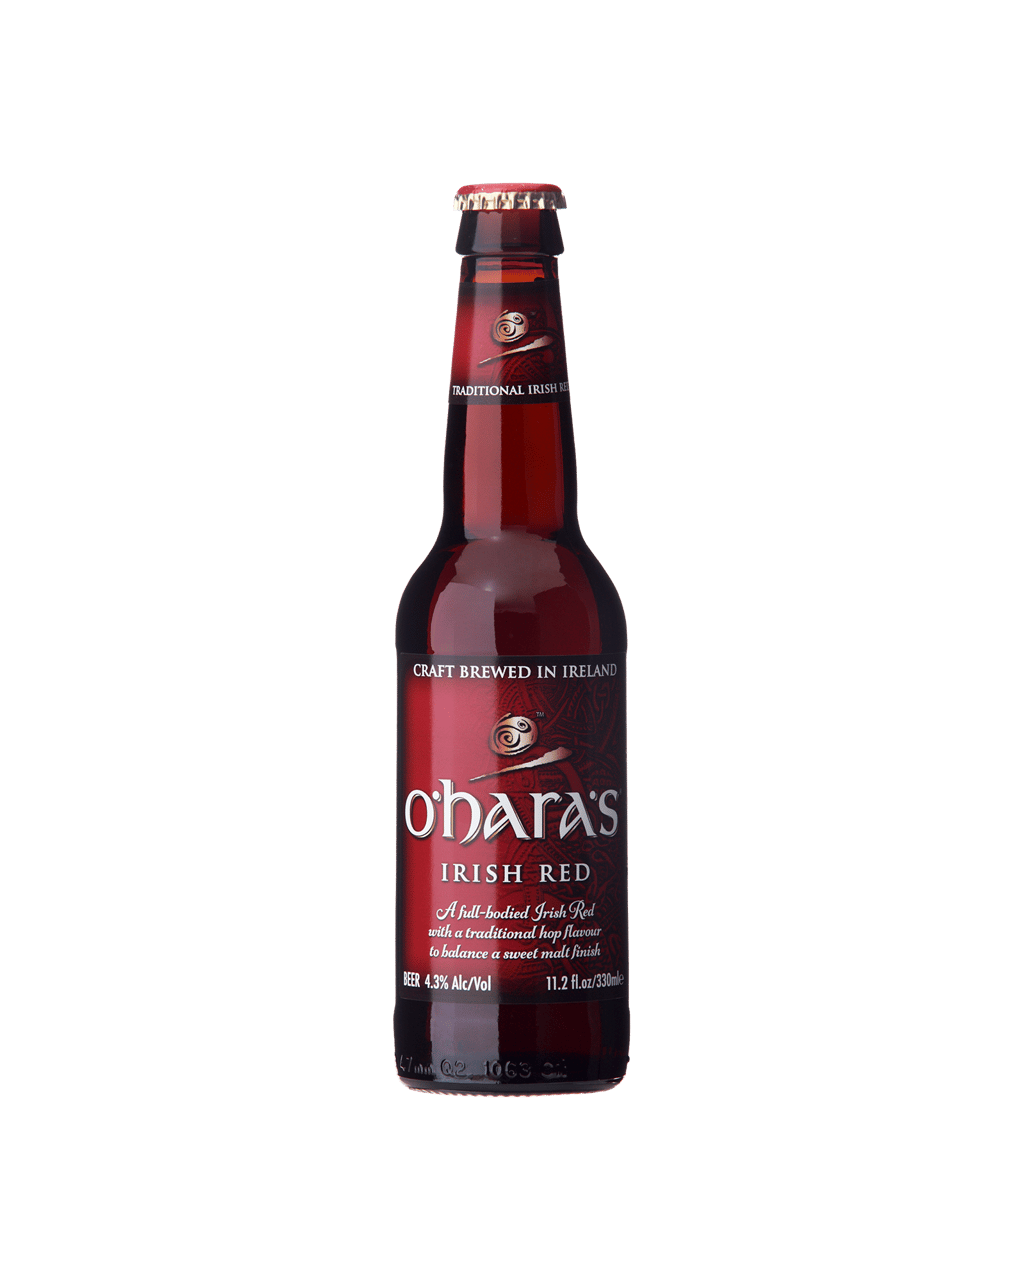 Burma svimmel Afstå Buy O'hara's Irish Red Ale 330ml Online or Near You in Australia [with Same  Day Delivery* & Best Offers] - Dan Murphy's